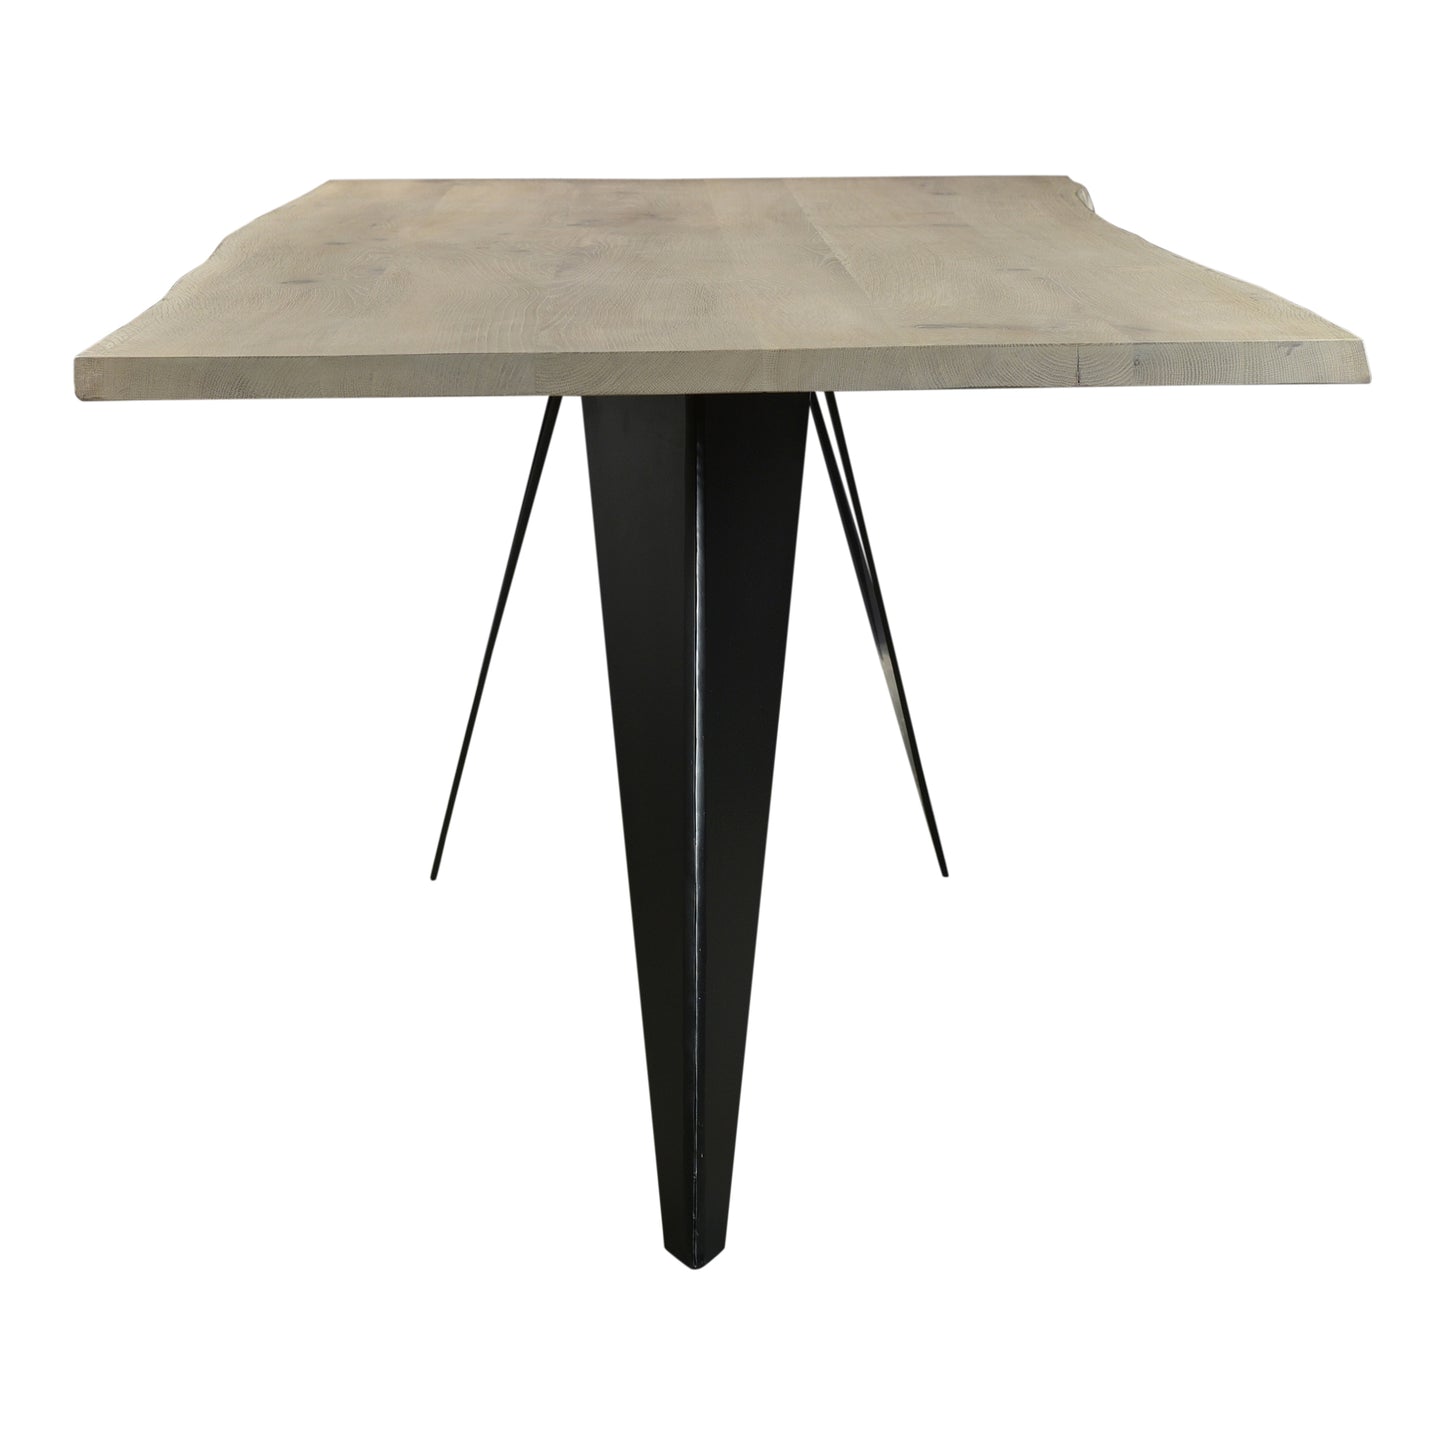 Bird Dining Table Dining Tables Moe's    Four Hands, Mid Century Modern Furniture, Old Bones Furniture Company, Old Bones Co, Modern Mid Century, Designer Furniture, Furniture Sale, Warehouse Furniture Sale, Bird Dining Table Sale, https://www.oldbonesco.com/